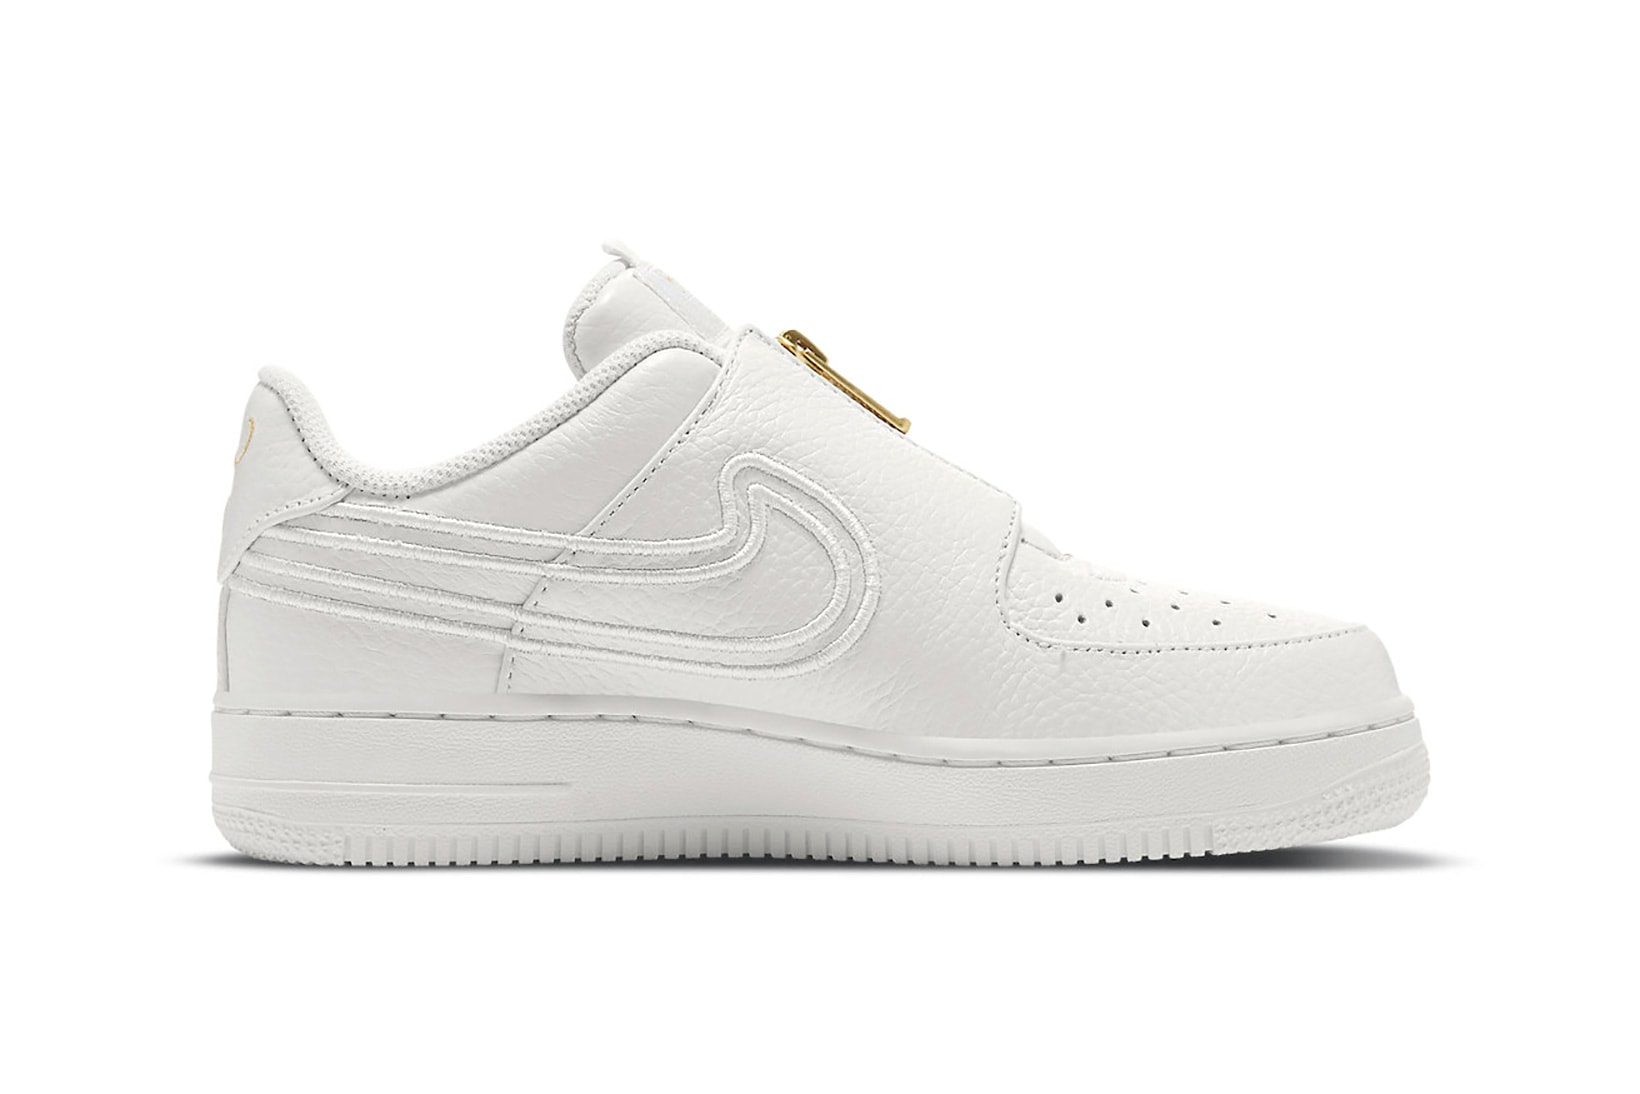 Serena Williams Nike Air Force 1 LXX Zip Sneakers Collaboration Footwear Kicks White Gold Lateral